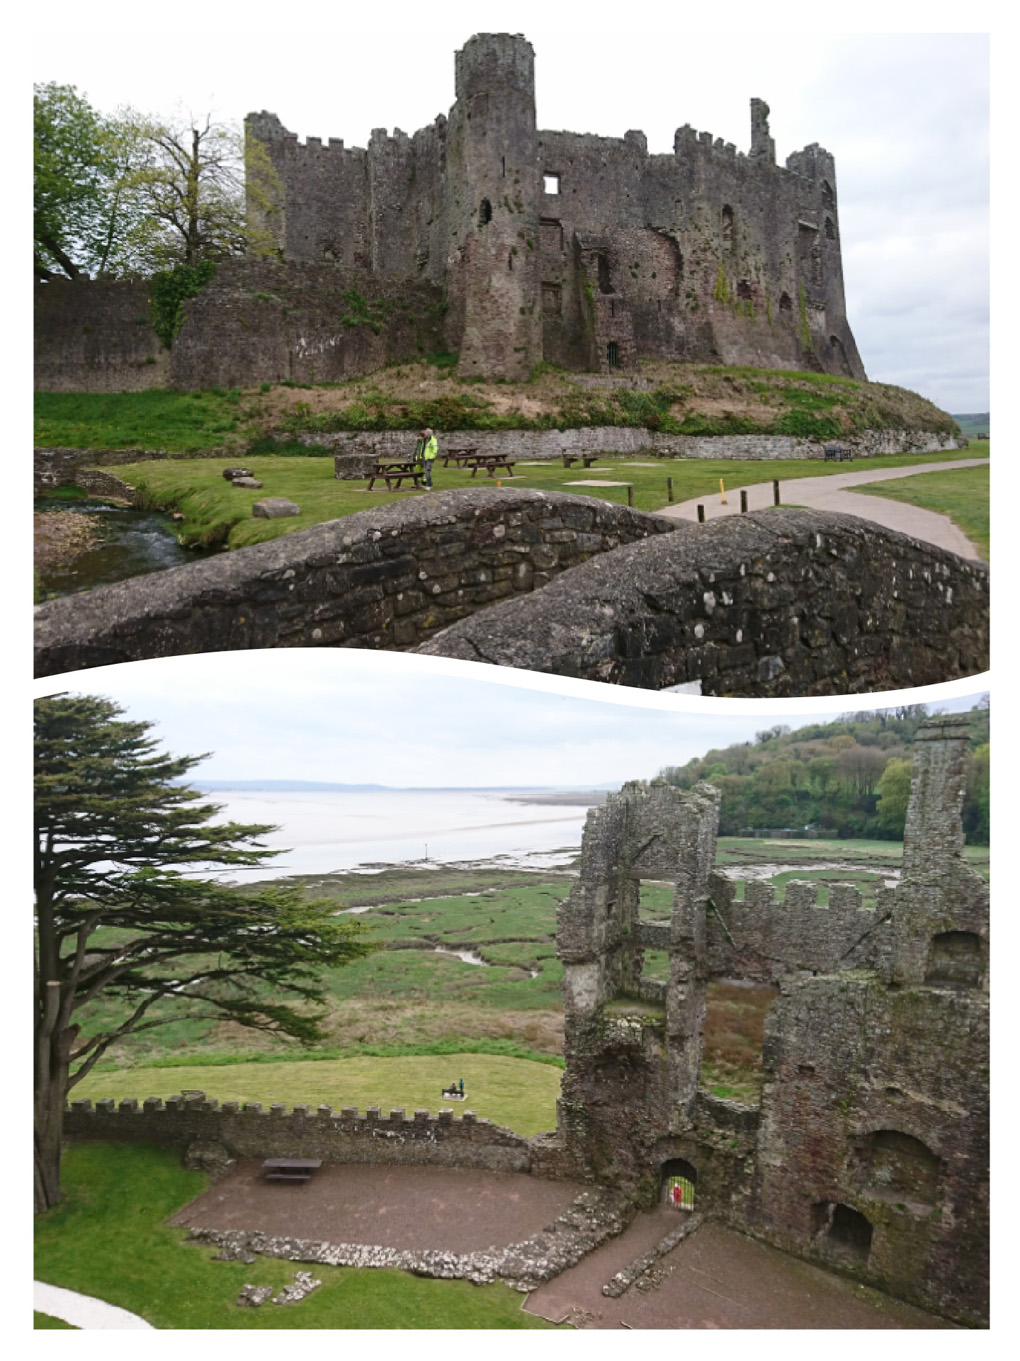 The beautiful Laugharne Castle rising at the edge of the coast, at the mouth of the River Taf - a most romantic location with the town nestled behind the castle. Its origins are believed to be Norman but it has been added to over the centuries since. One of the towers was almost intact and could be climbed to the top from which there was a lovely view. The artist Turner painted a watercolour of the castle from a sketch he did in 1795 . Dylan Thomas (the poet) also had a boathouse nearby. An interesting place altold!